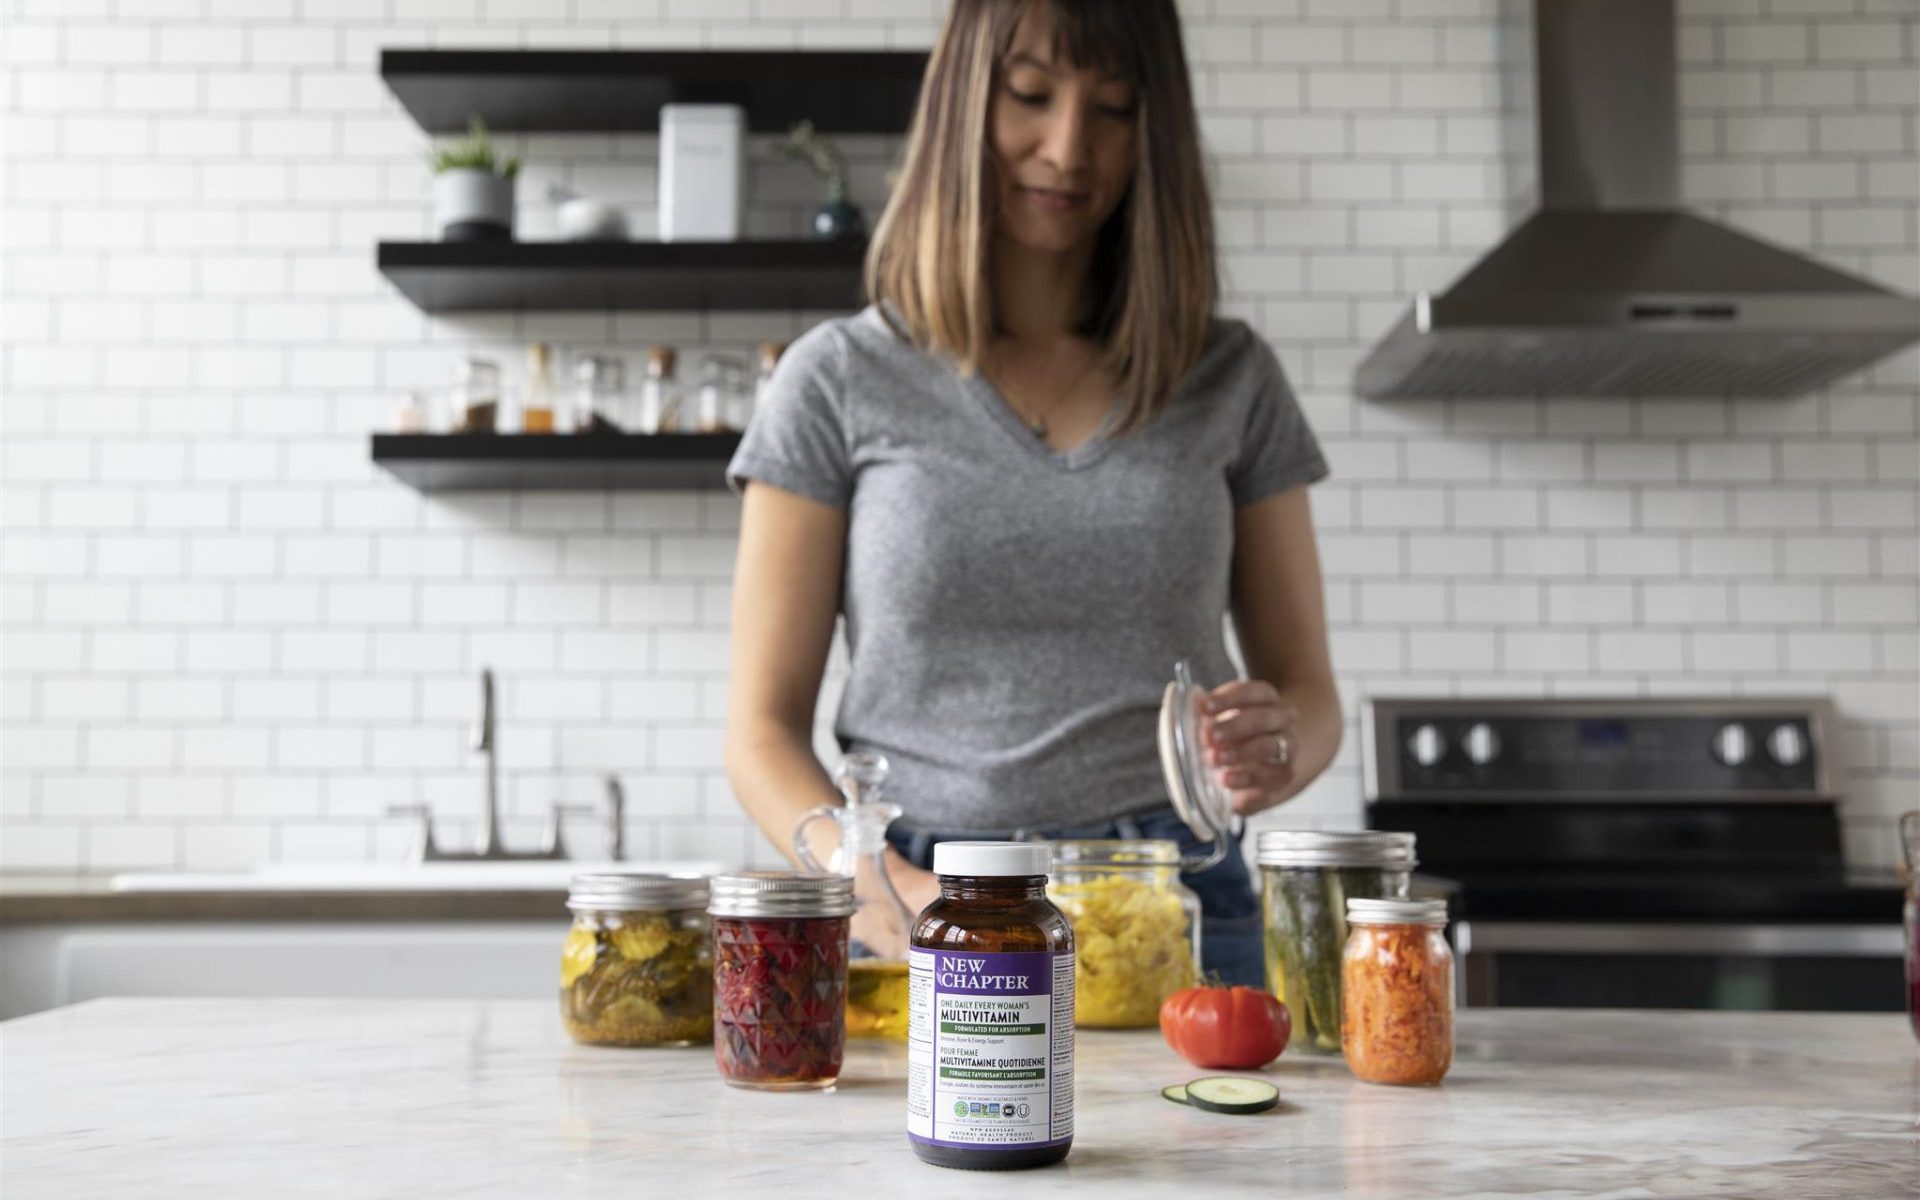 Woman canning fermented vegetables in her kitchen, New Chapter Multivitamins in front